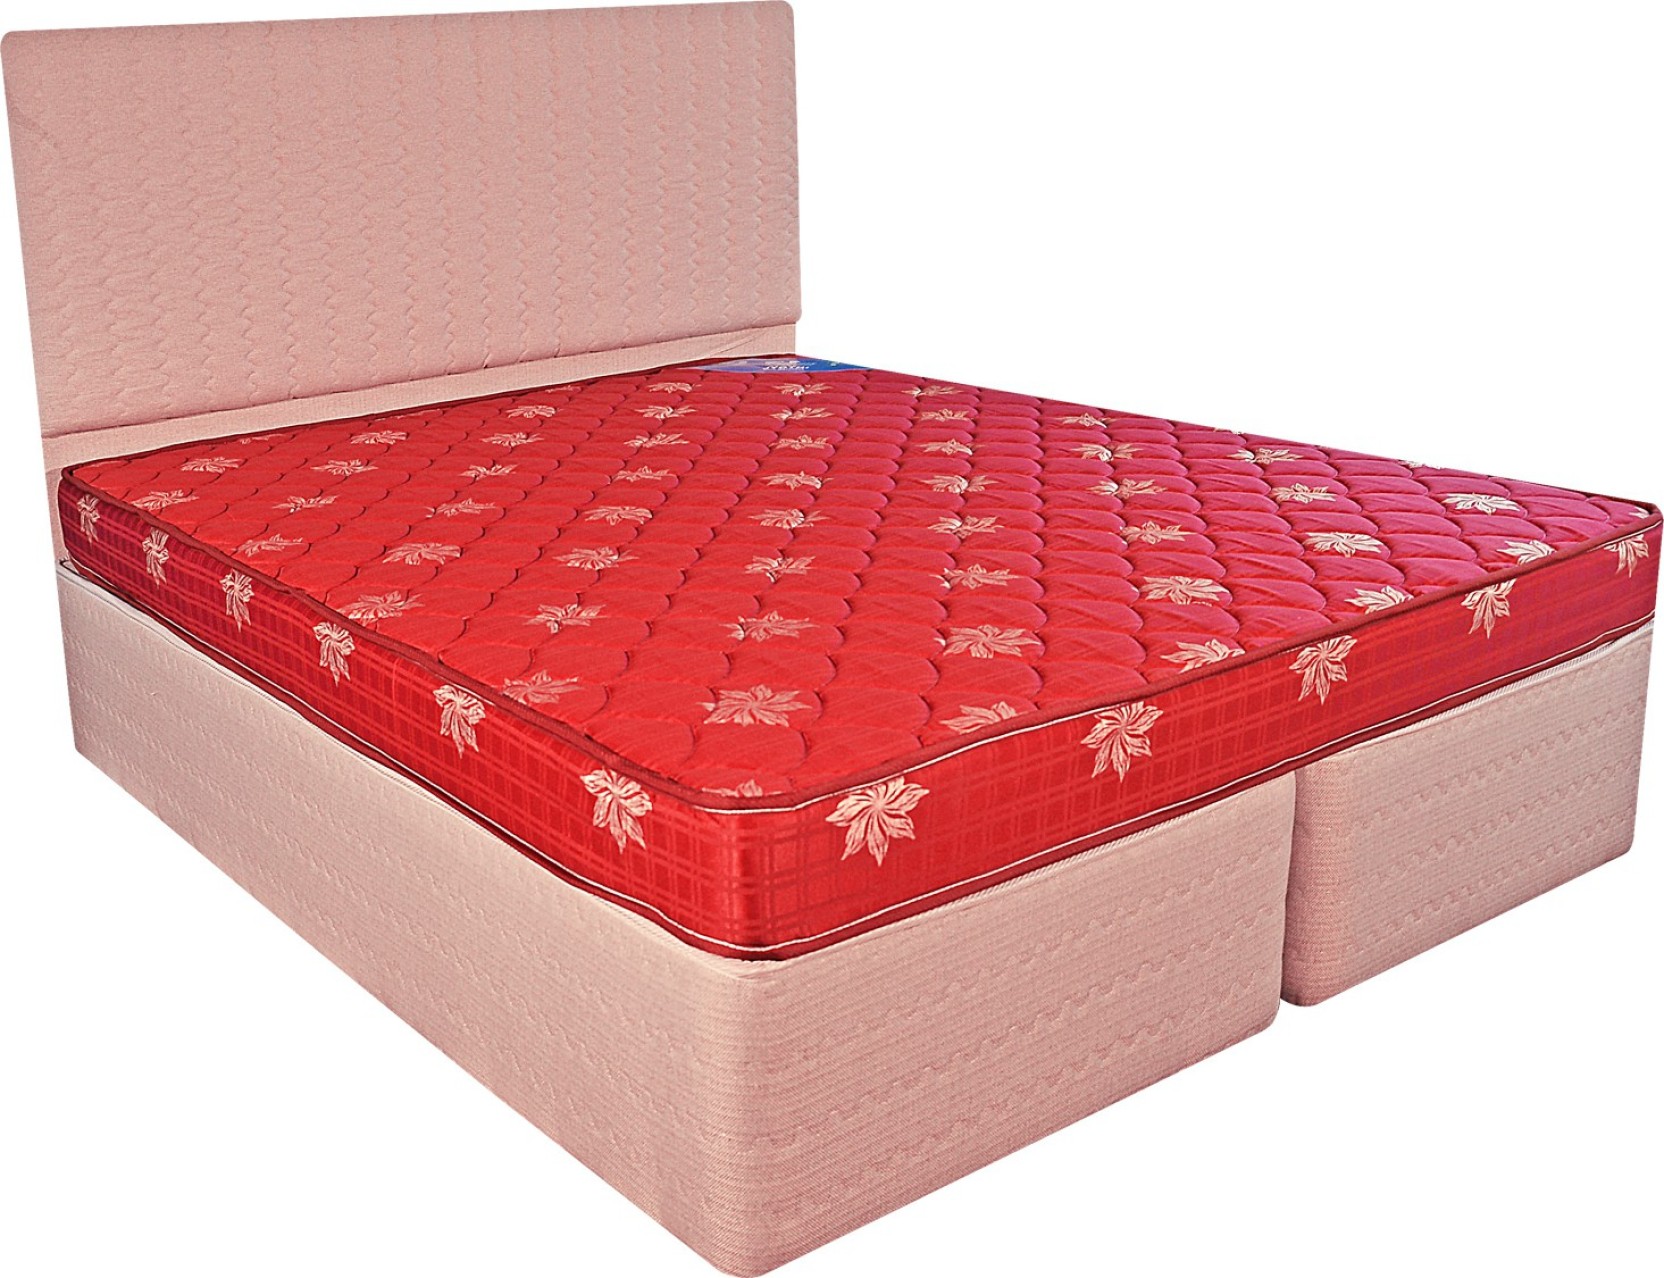 centuary mattress double bed price